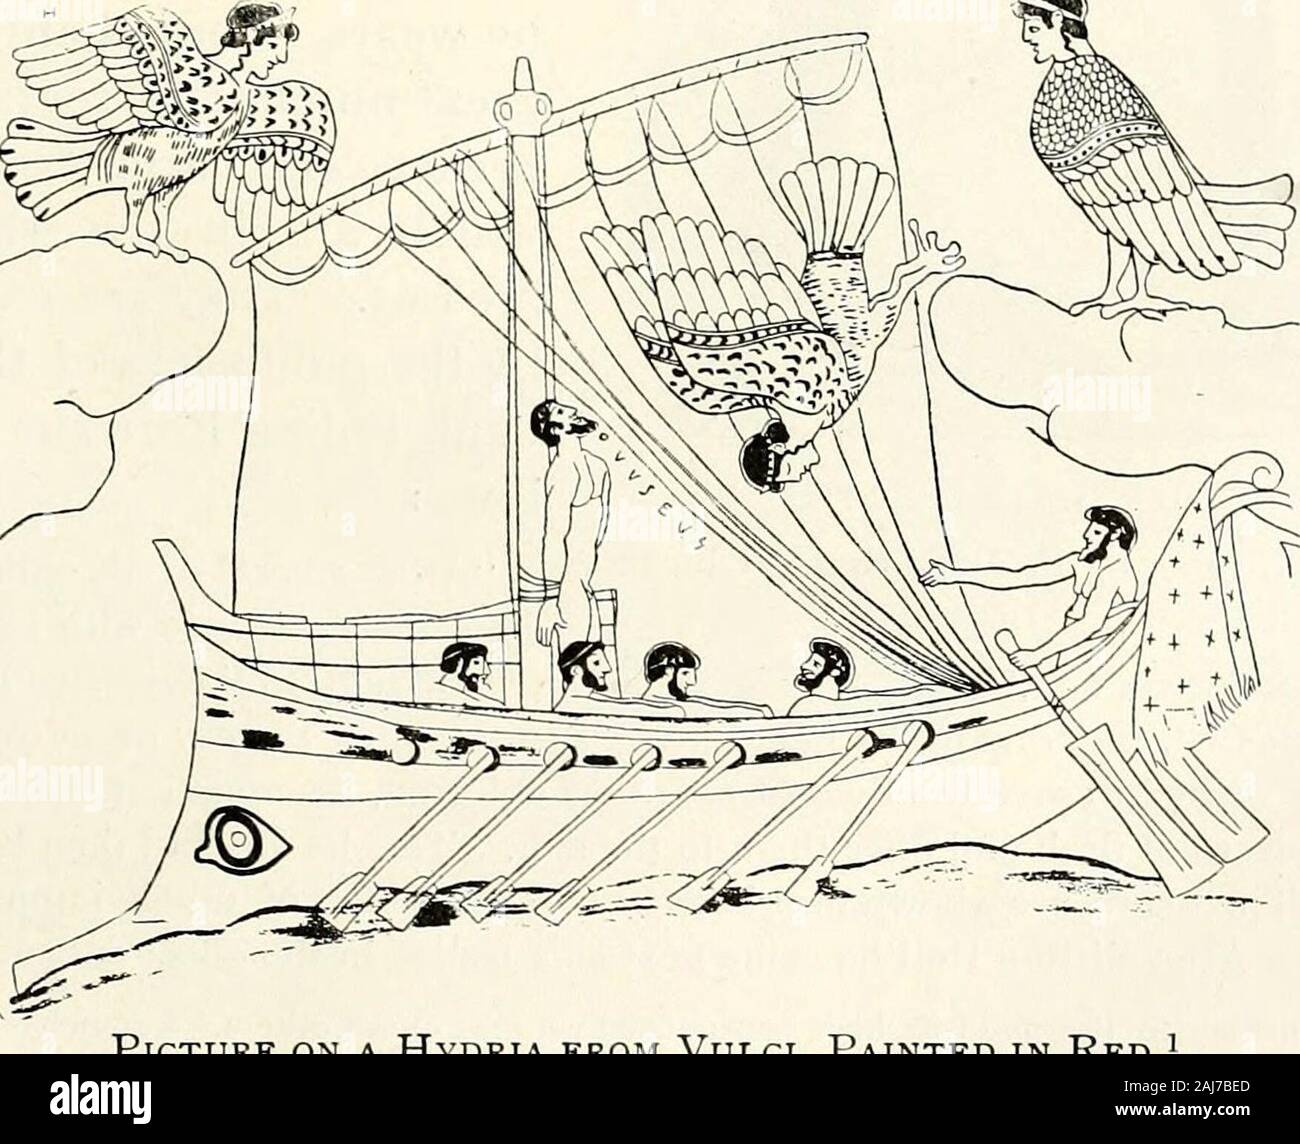 The Open court . The Battle of Theseus with the Amazons.One Amazon wears a dress covered with crosses, another one with discs.. Picture on a Hydria from Vulci, Painted in Red of men as well as women. Odysseus, when passing the Sirens, hasa mantle or some kind of drapery hanging over the stern of his 1 From Baumeisters Dejikmiihr, HI. p. 2000, after Fiorelli; and p. 1643, after Mont. Inst., I. 8. !40 THE OPEN COURT. ship, which here as in other places indicates the efficiency of thissymbol for salvation from death or generally for protection indanger, 1 That the cross as an amulet and ornament Stock Photo